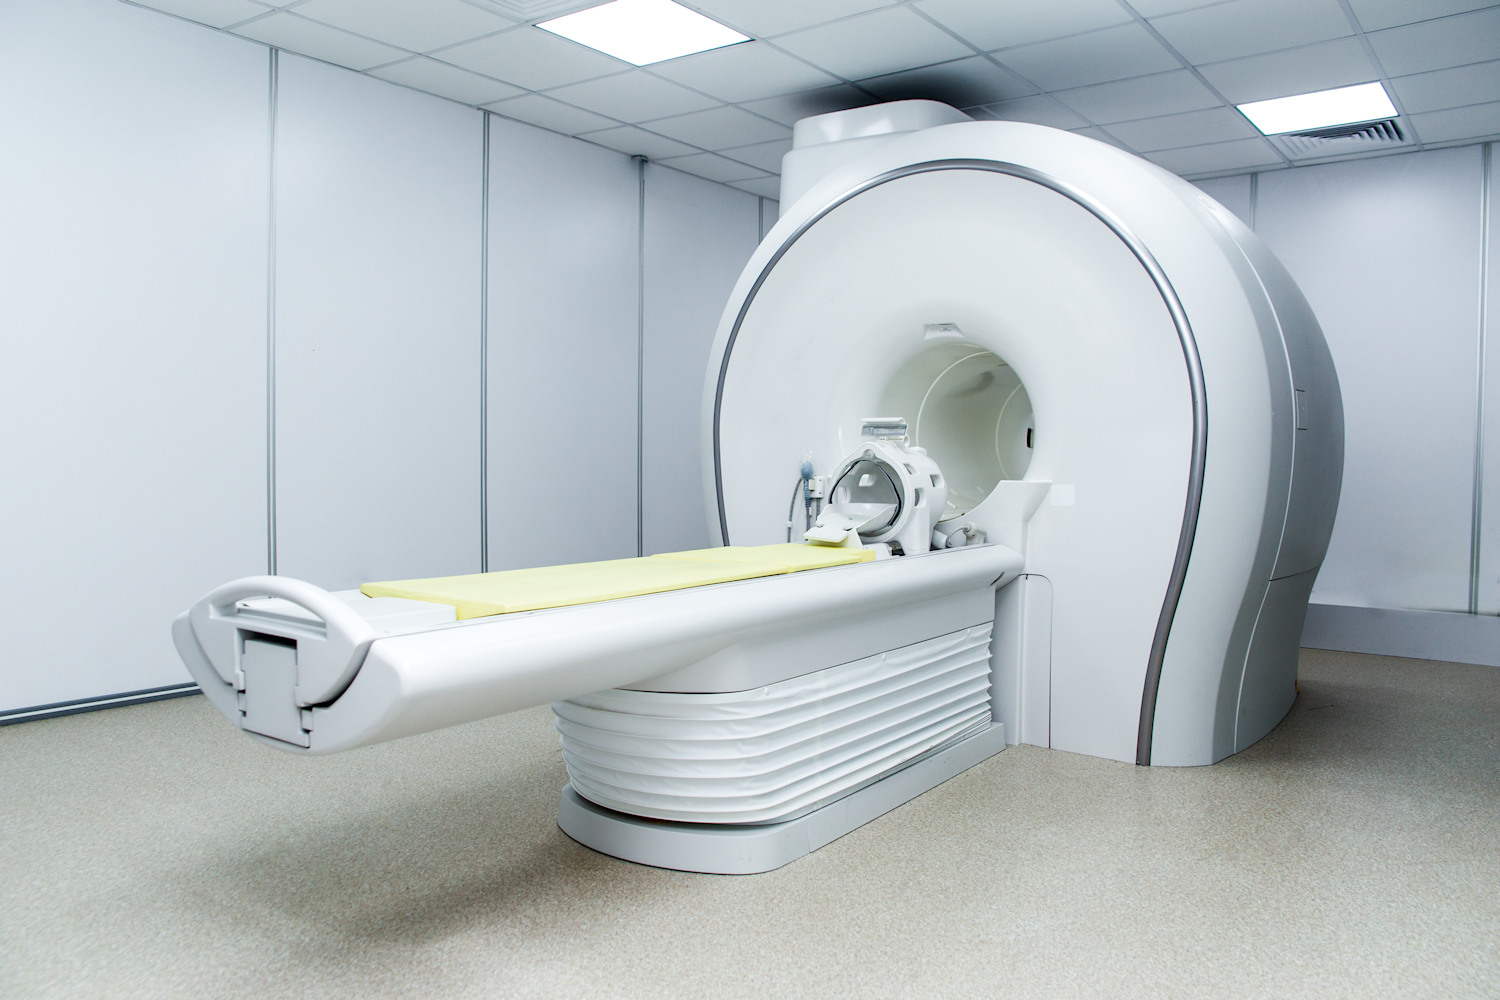 Picture of conventional MRI scanner